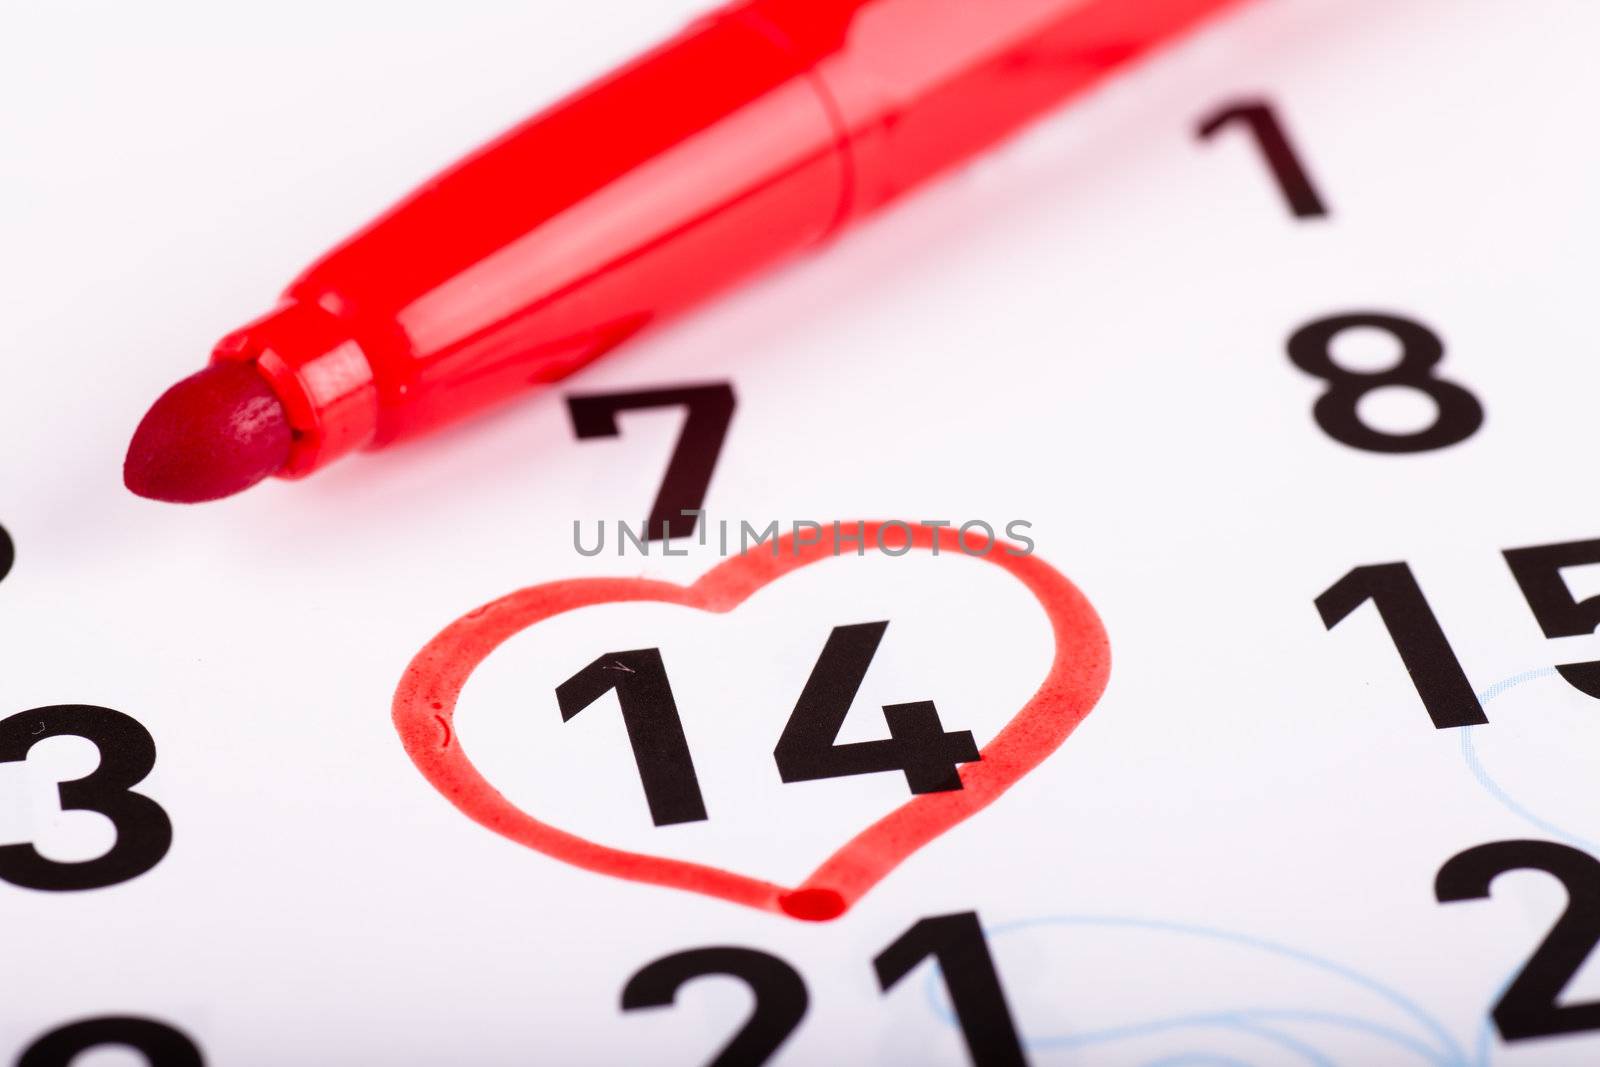 Sheet of wall calendar with red heart shaped mark on Valentines day